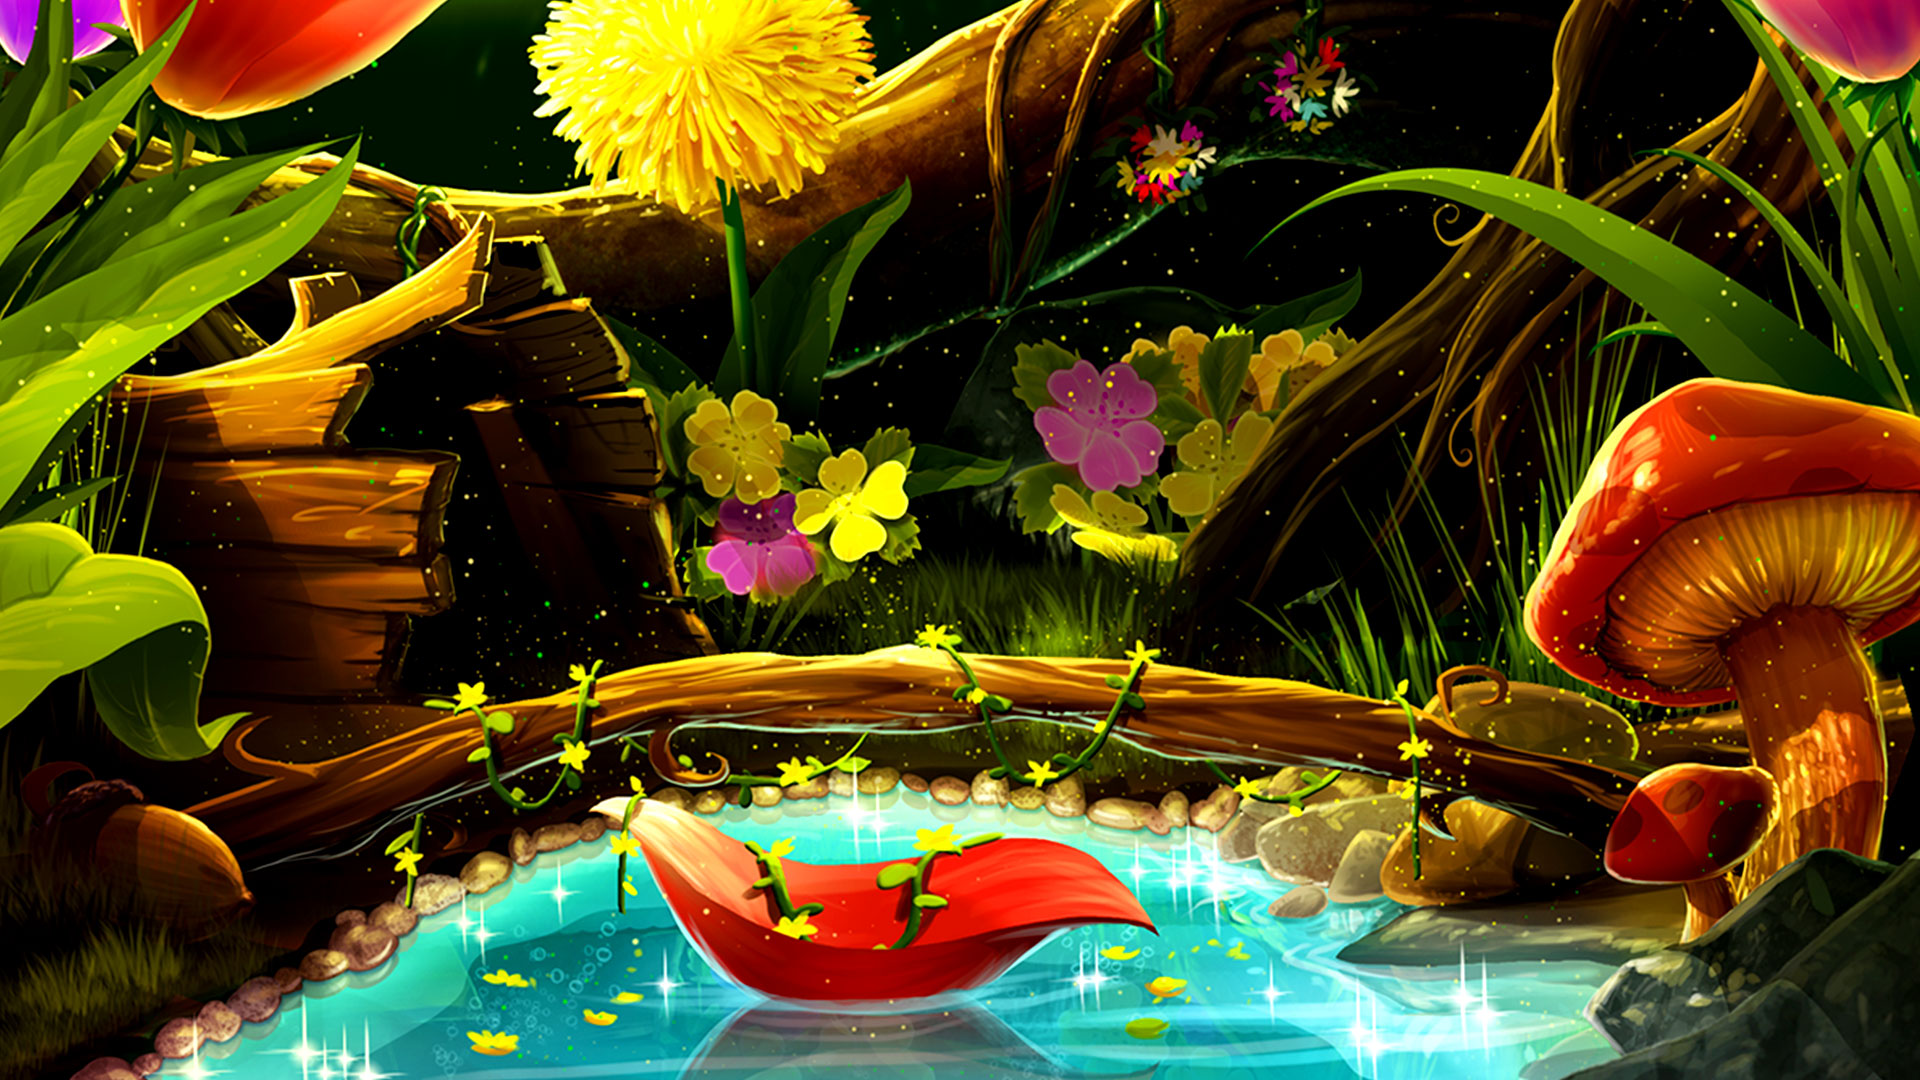 Game hight resolution background Enchanted Meadow